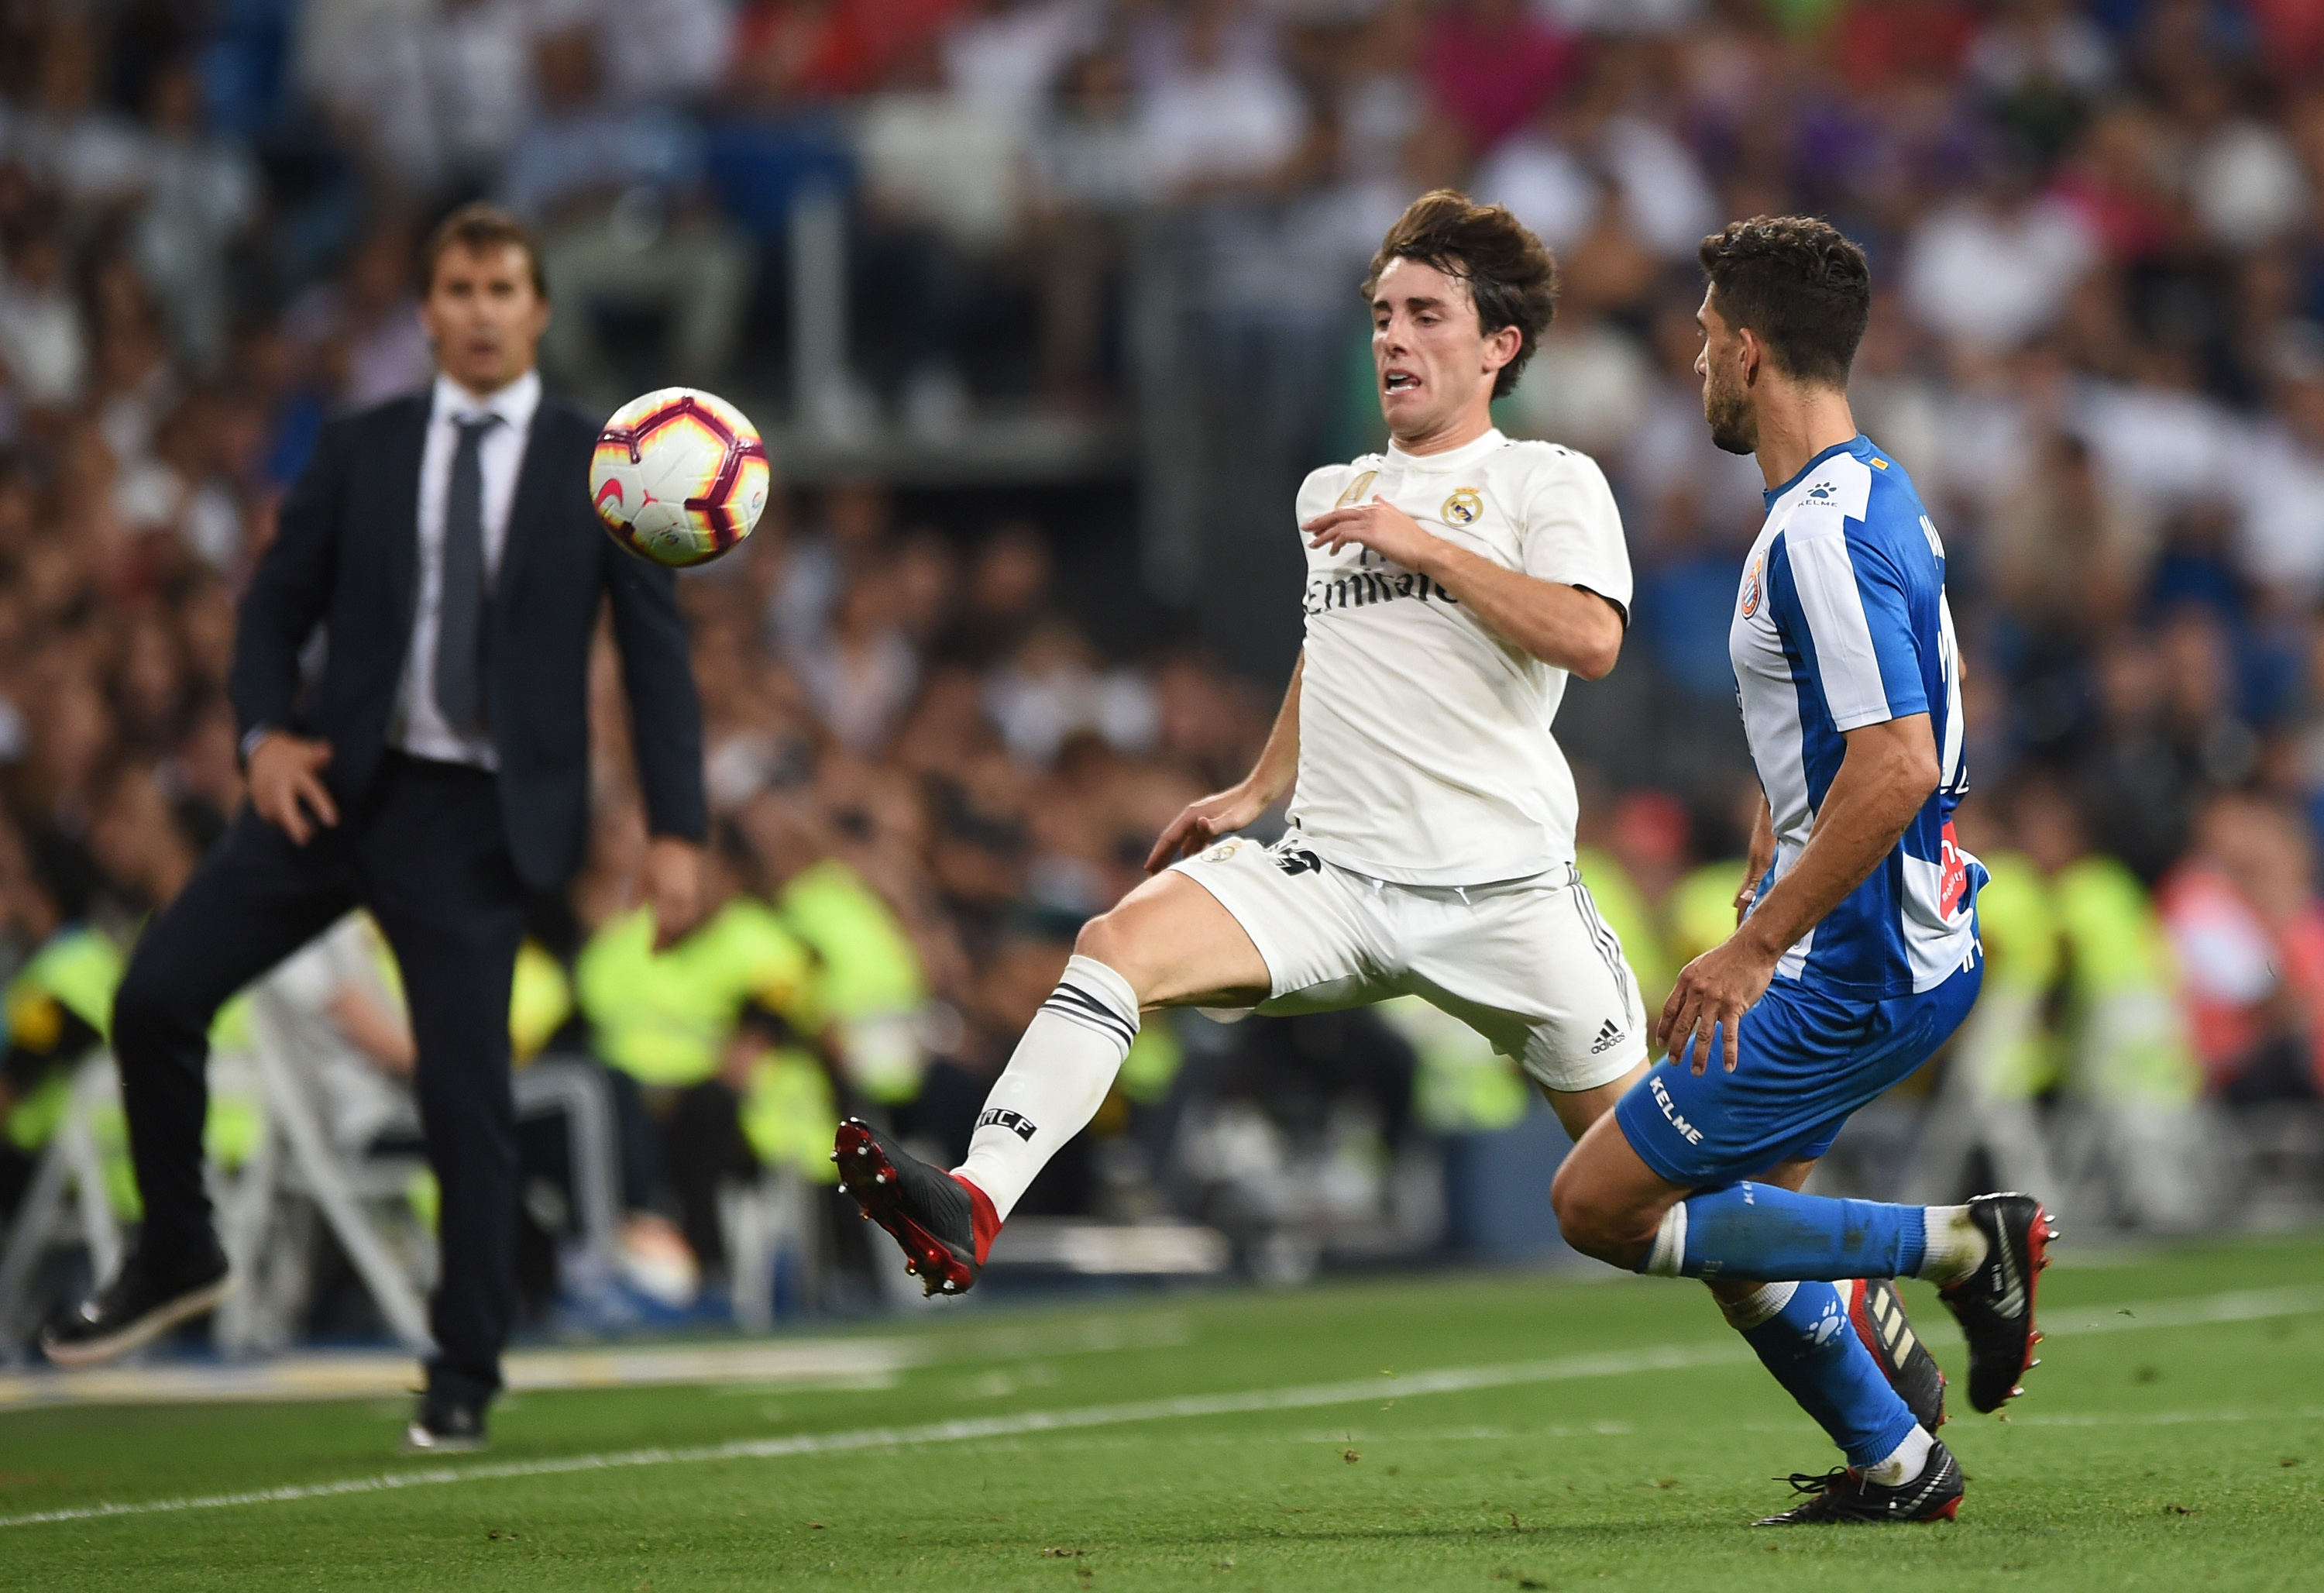 MADRID, SPAIN - SEPTEMBER 22:  Alvaro Odriozola (right) of Real Madrid battles for the ball against Didac Vila of RCD Espanyol during the La Liga match between Real Madrid CF and RCD Espanyol at Estadio Santiago Bernabeu on September 22, 2018 in Madrid, Spain. (Photo by Denis Doyle/Getty Images,)